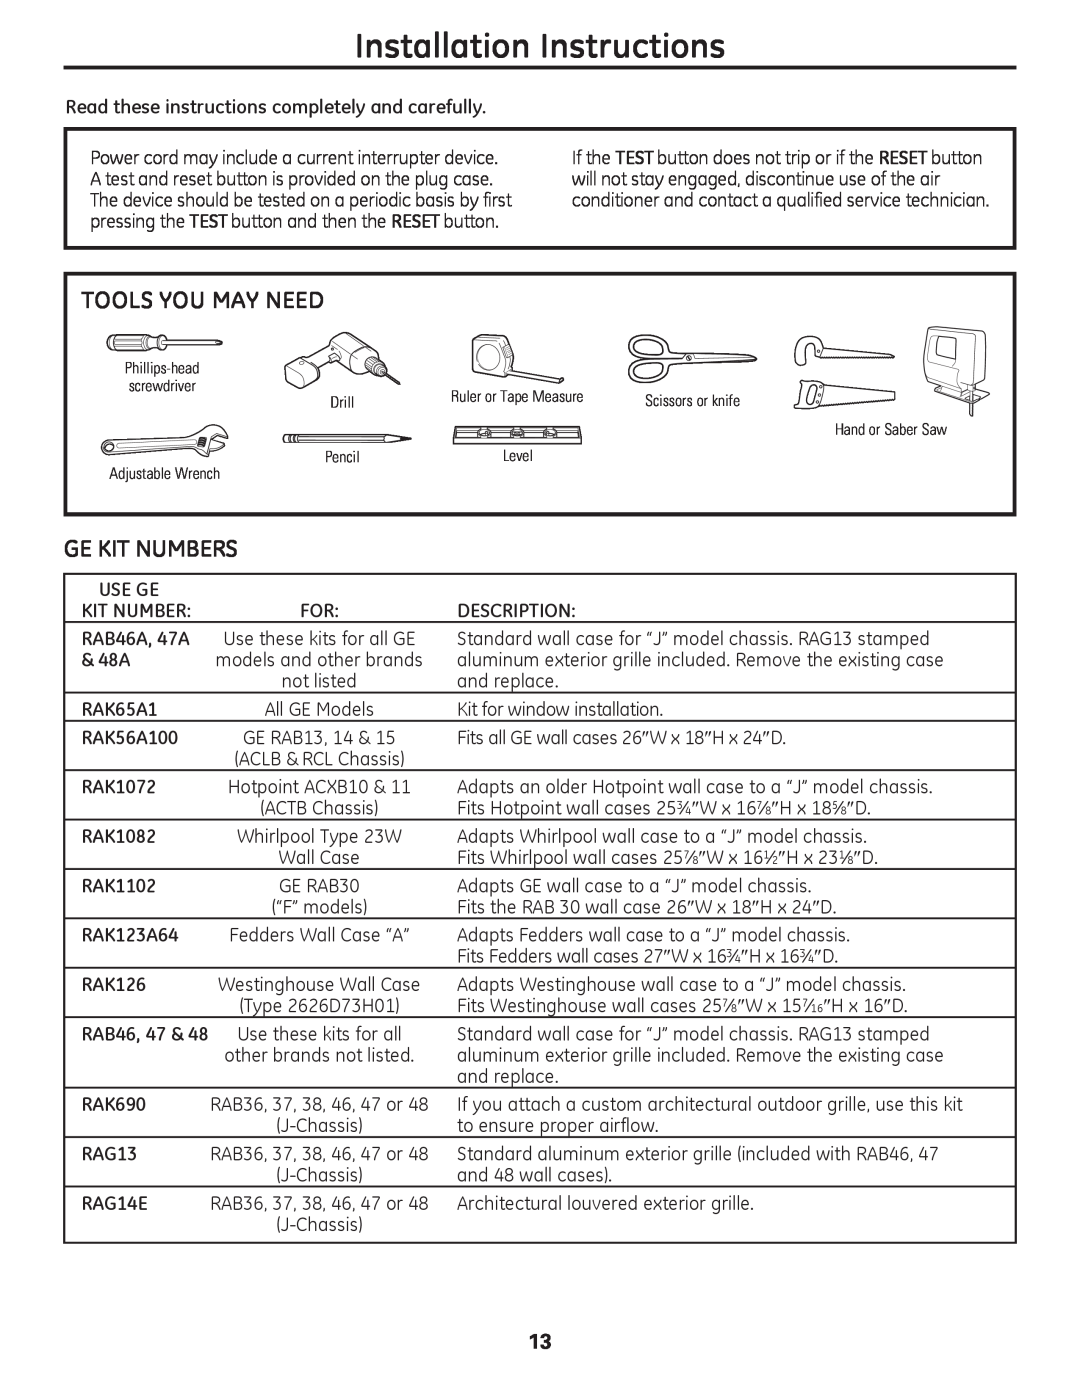 GE AJCM 08 ACD installation instructions Installation Instructions, Tools You May Need, Ge Kit Numbers 